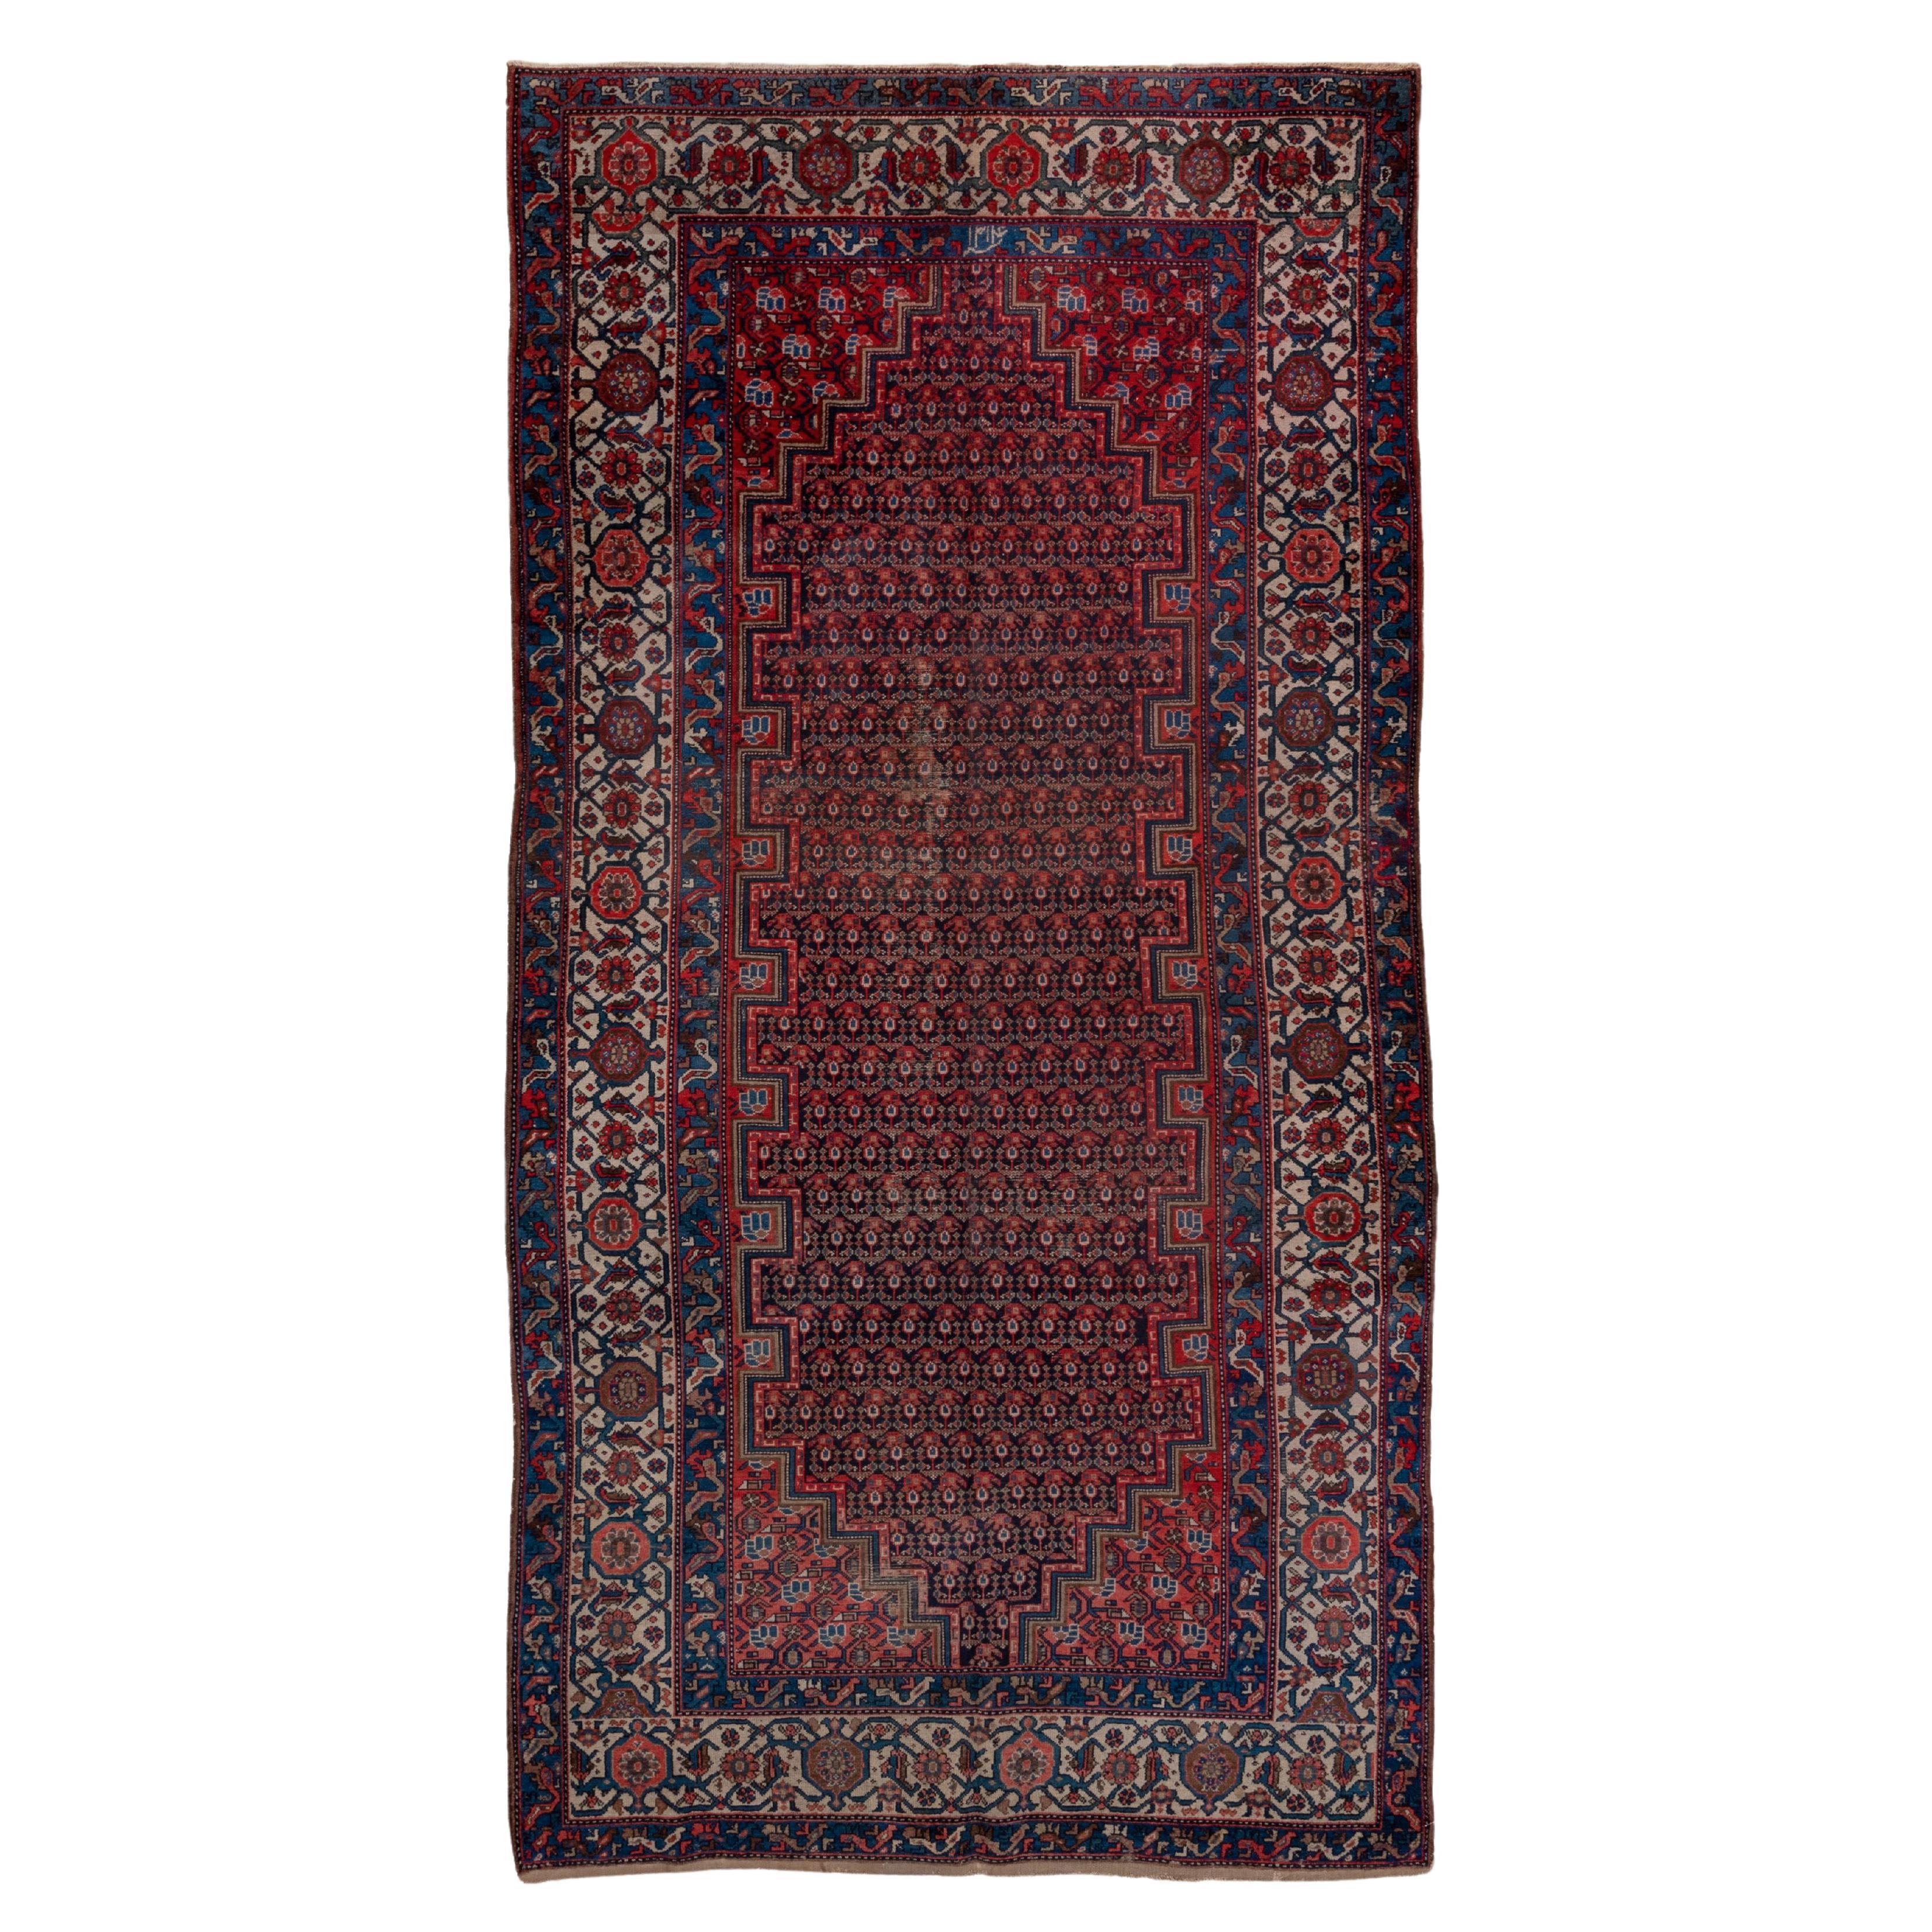 Shabby Chic Antique Persian Malayer Gallery Rug, Navy & Light Red Paisley Field